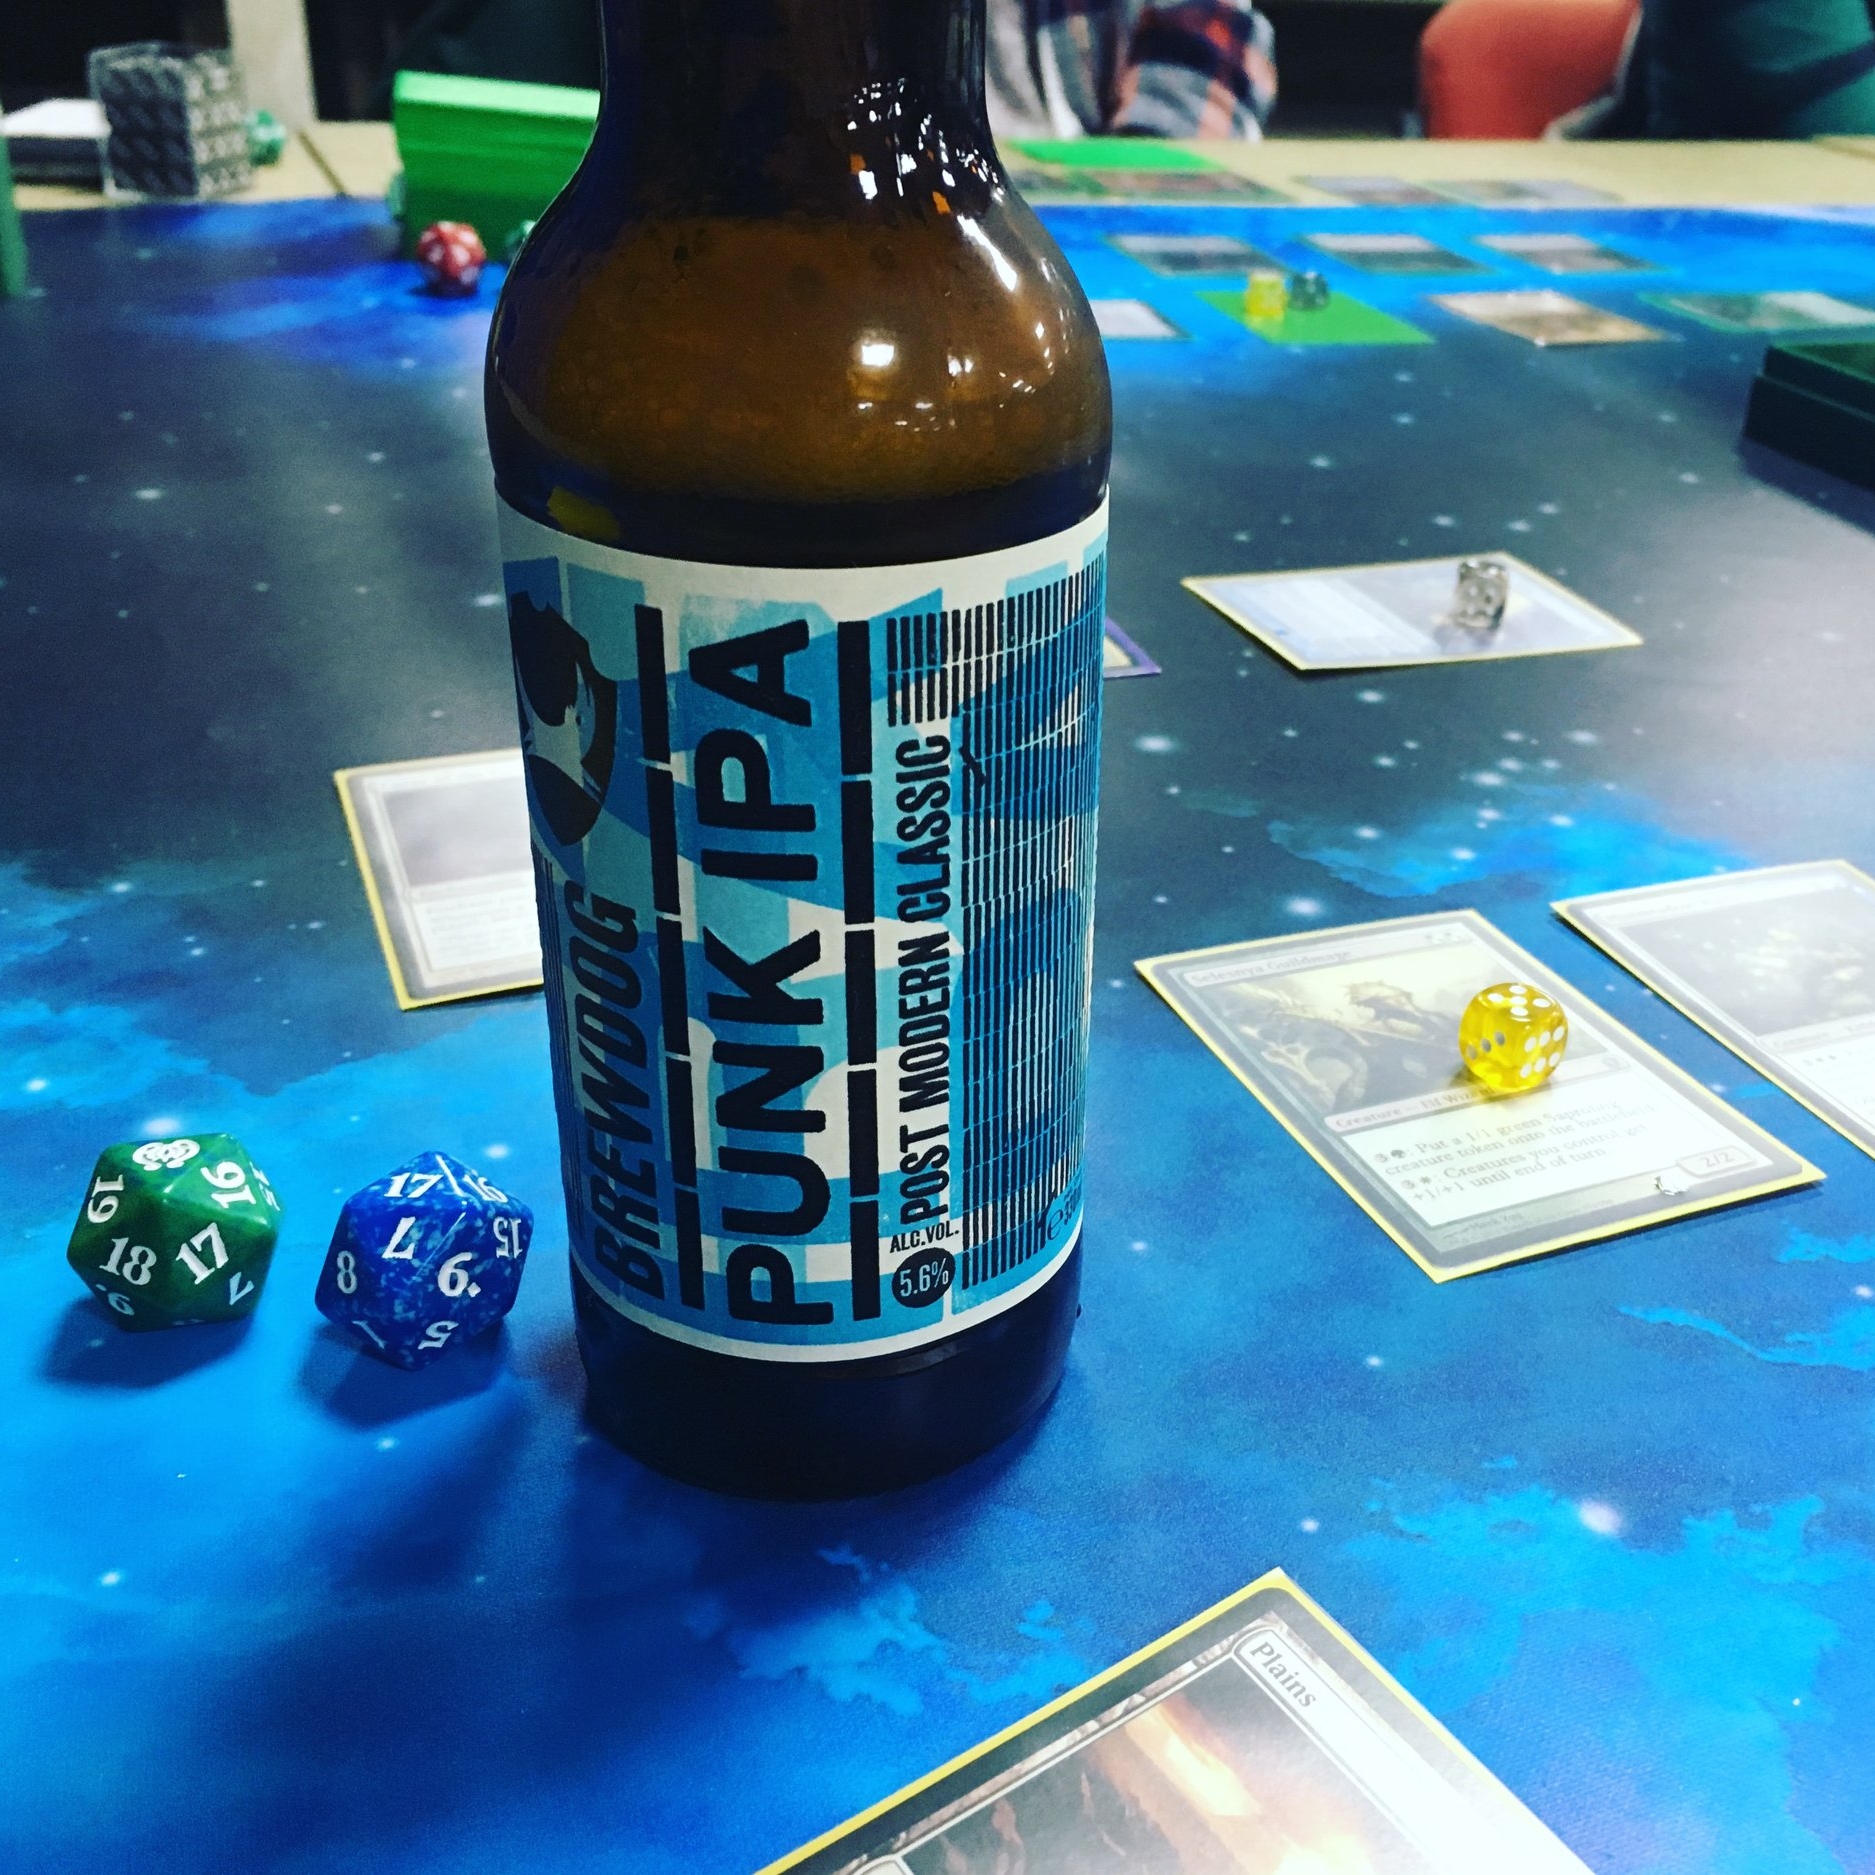 IPA & games - my fave things!